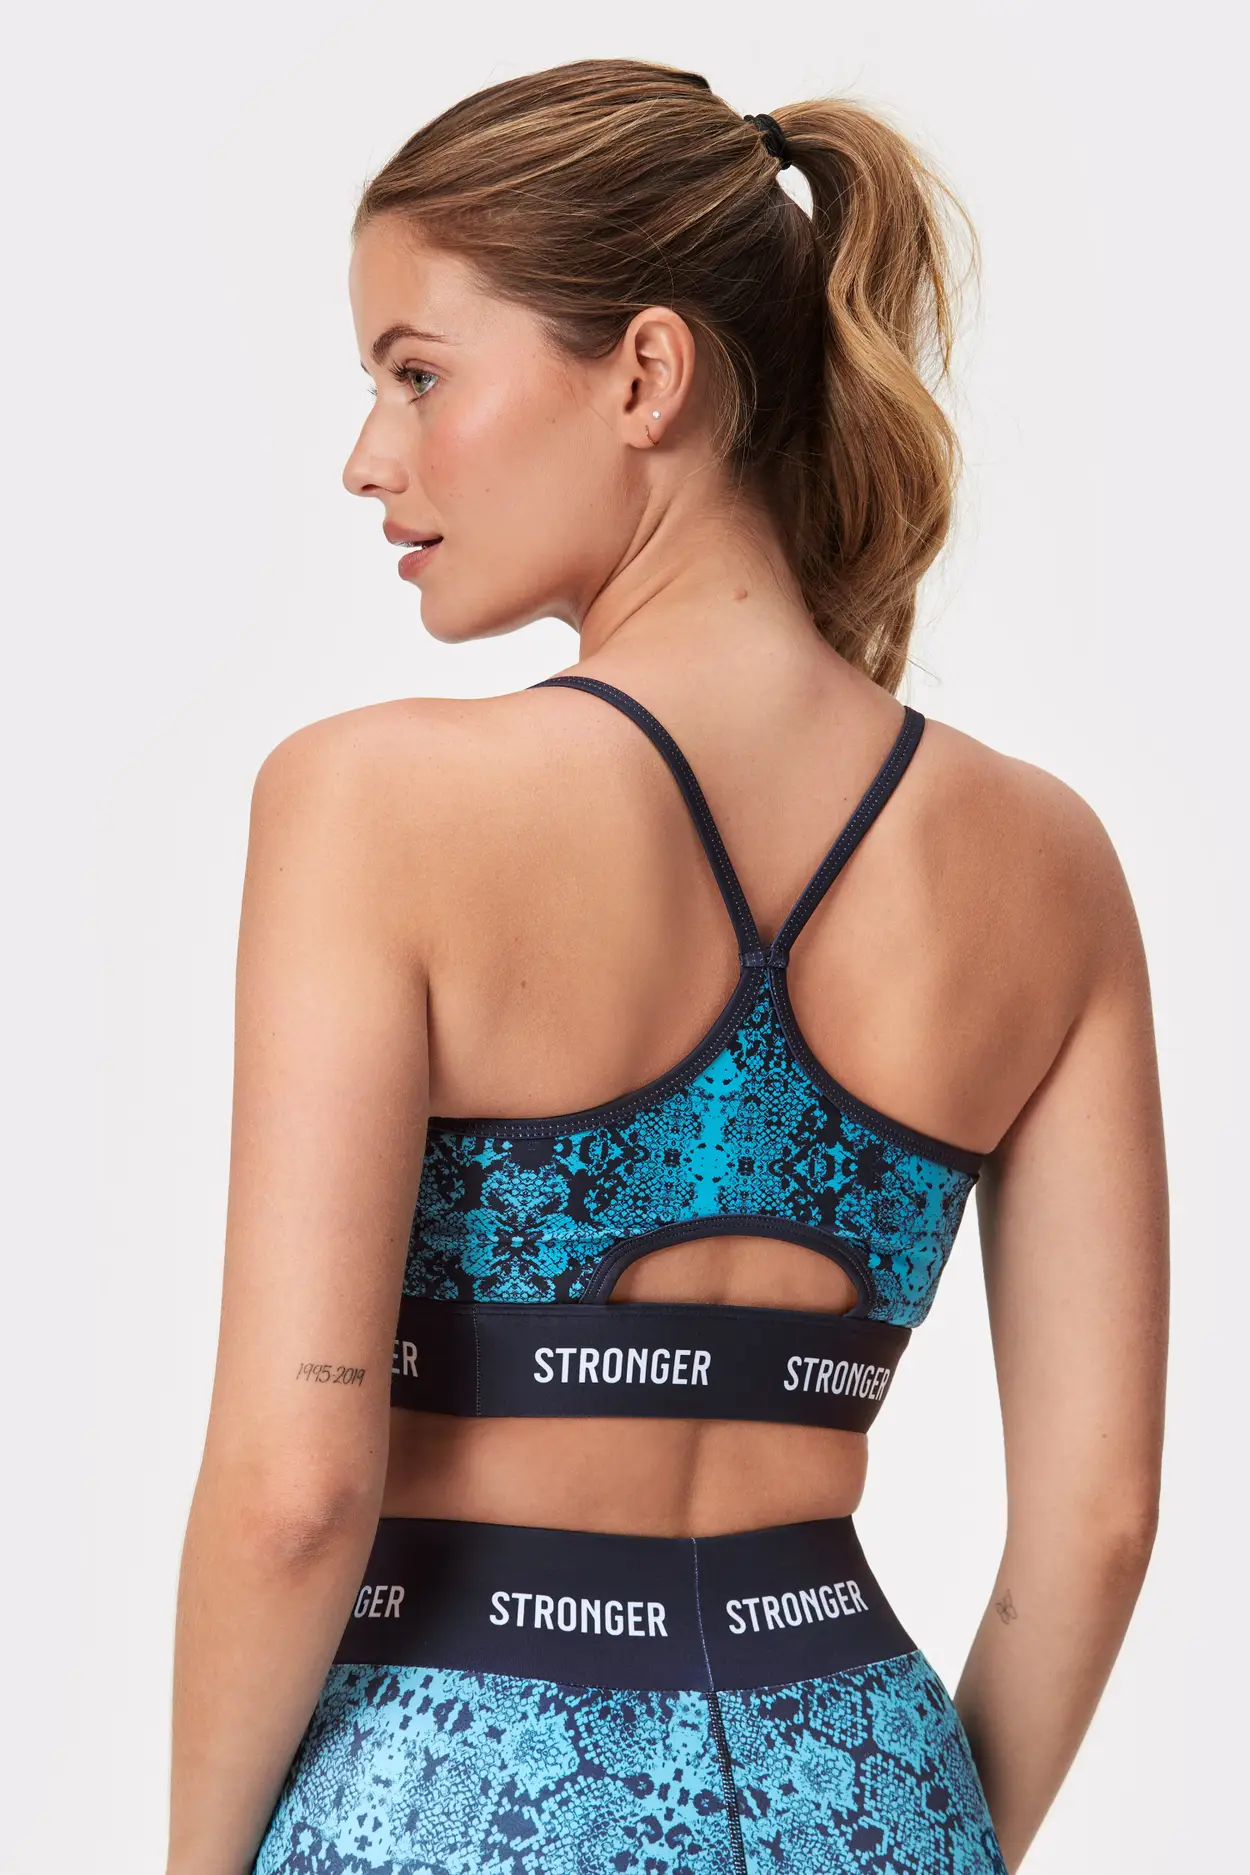 Brynn 36D  Most comfortable sports bra I have ever owned – Betts Fit